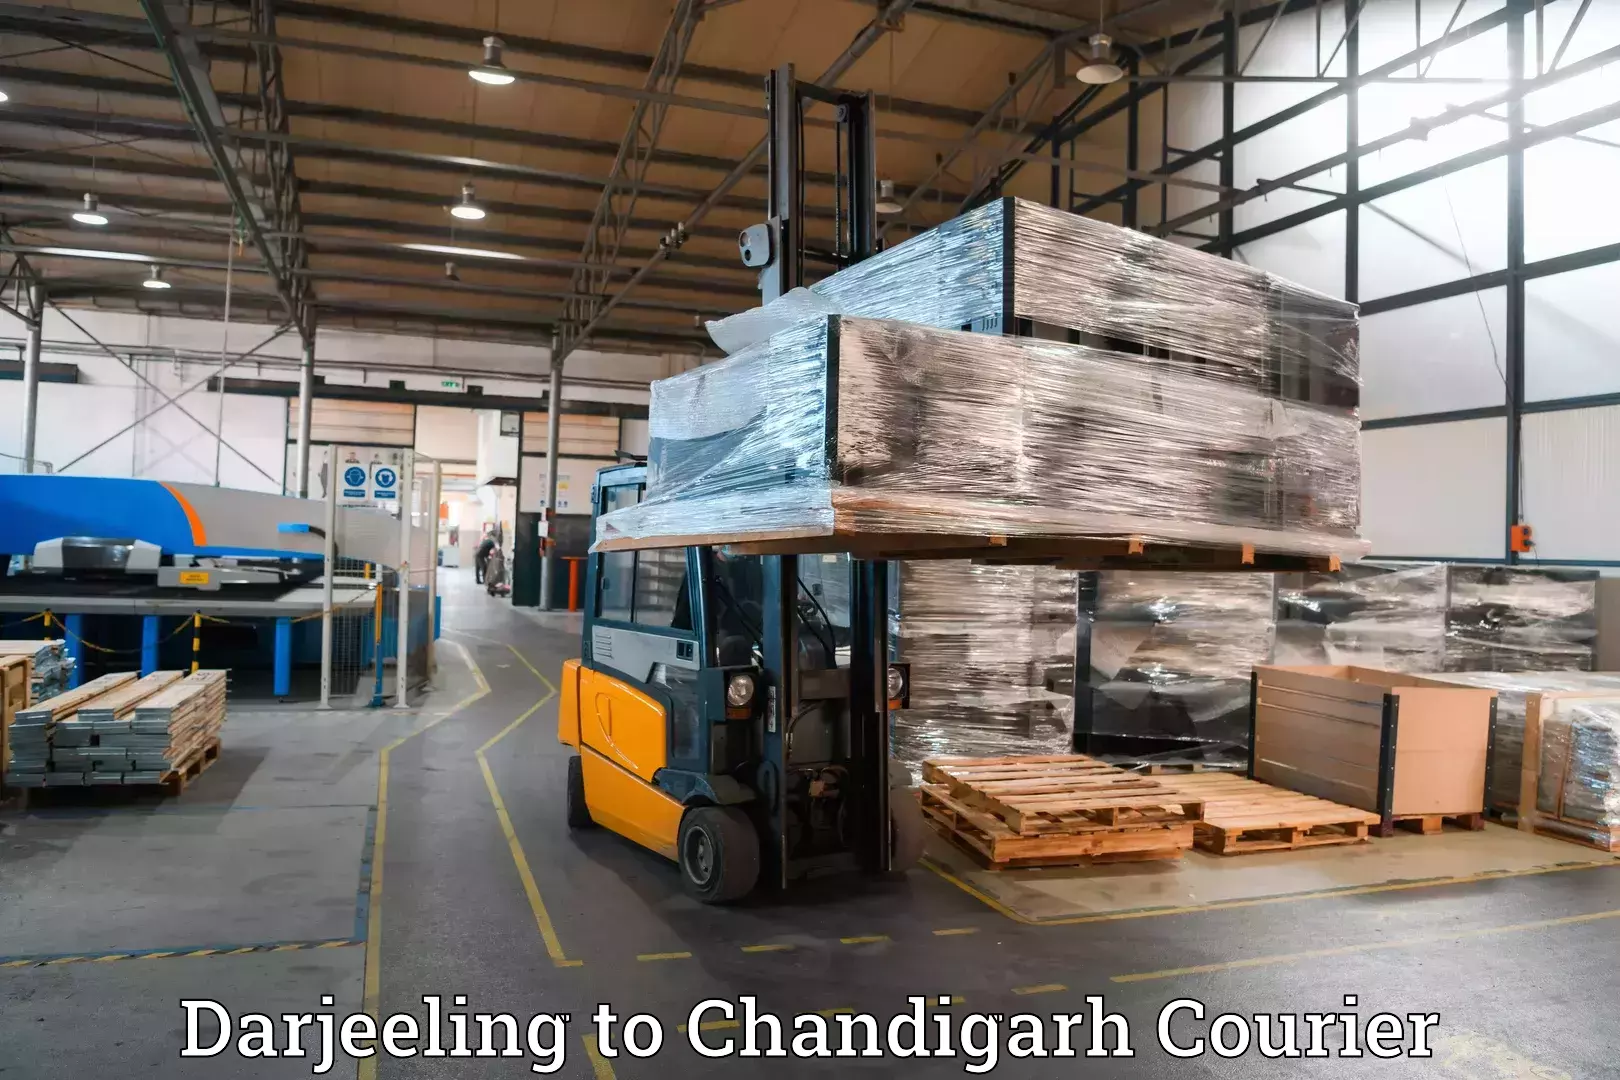 Luggage delivery network Darjeeling to Chandigarh